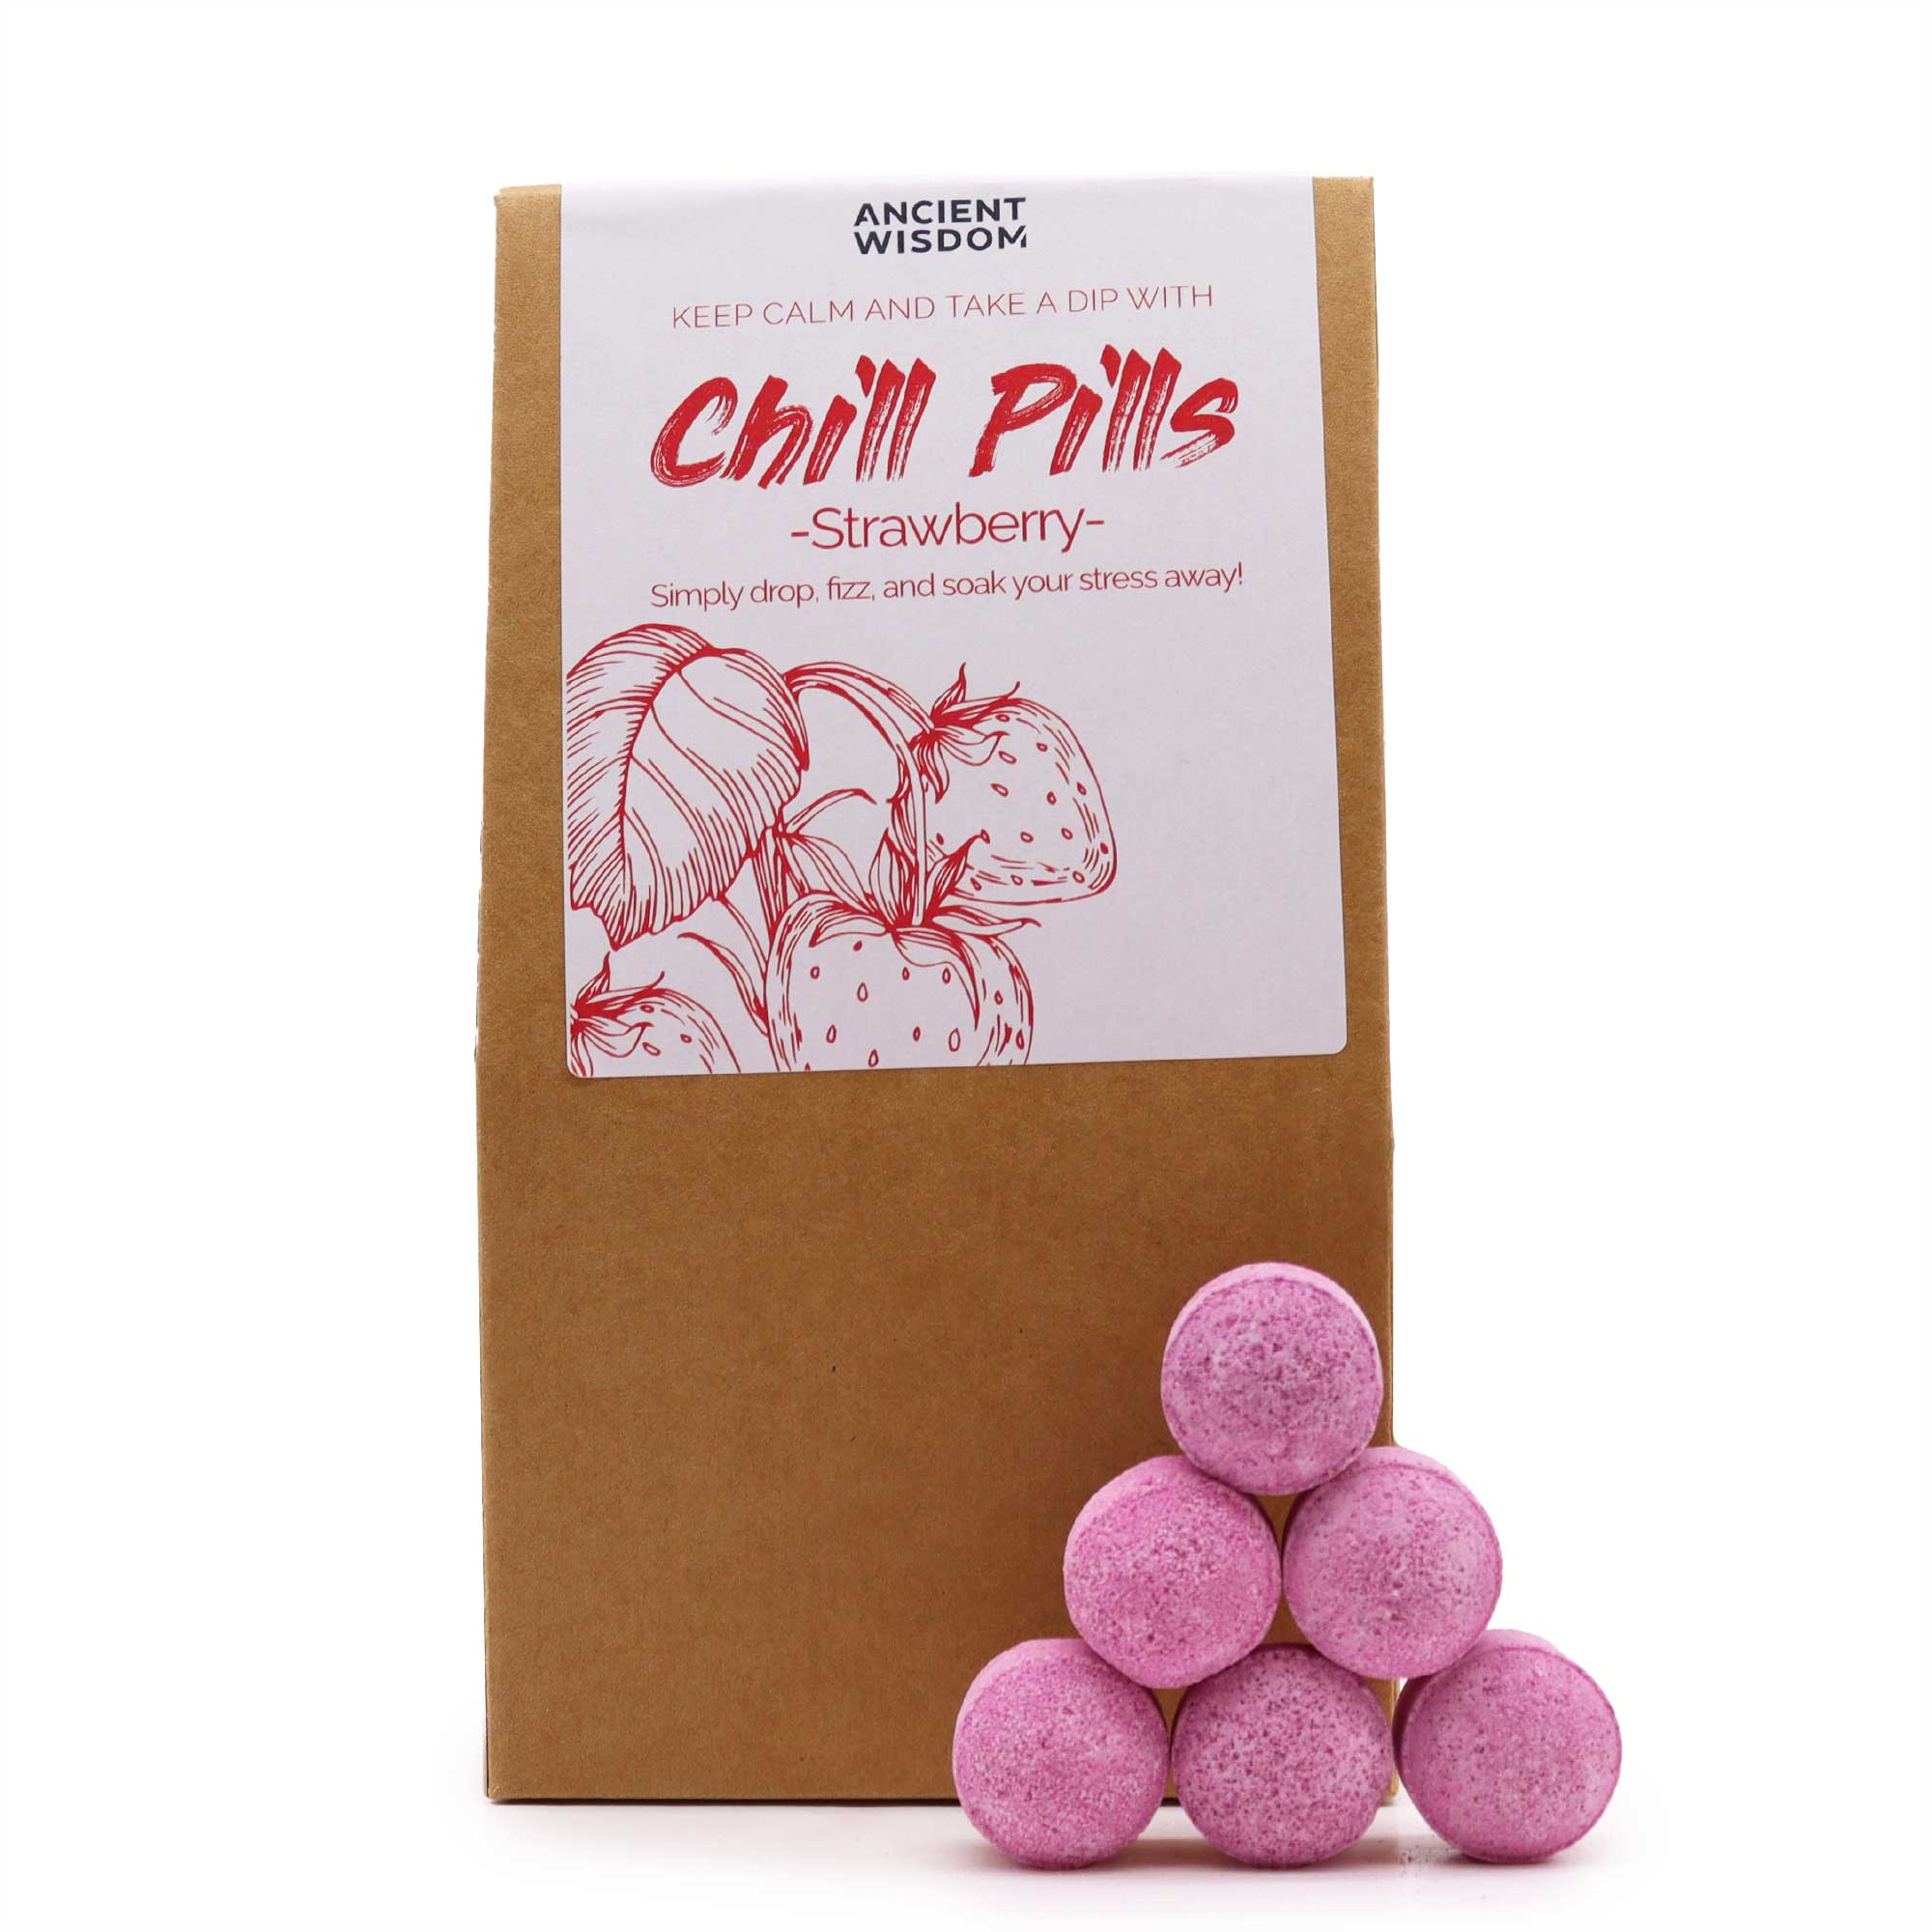 View Chill Pills Gift Pack 350g Strawberry information